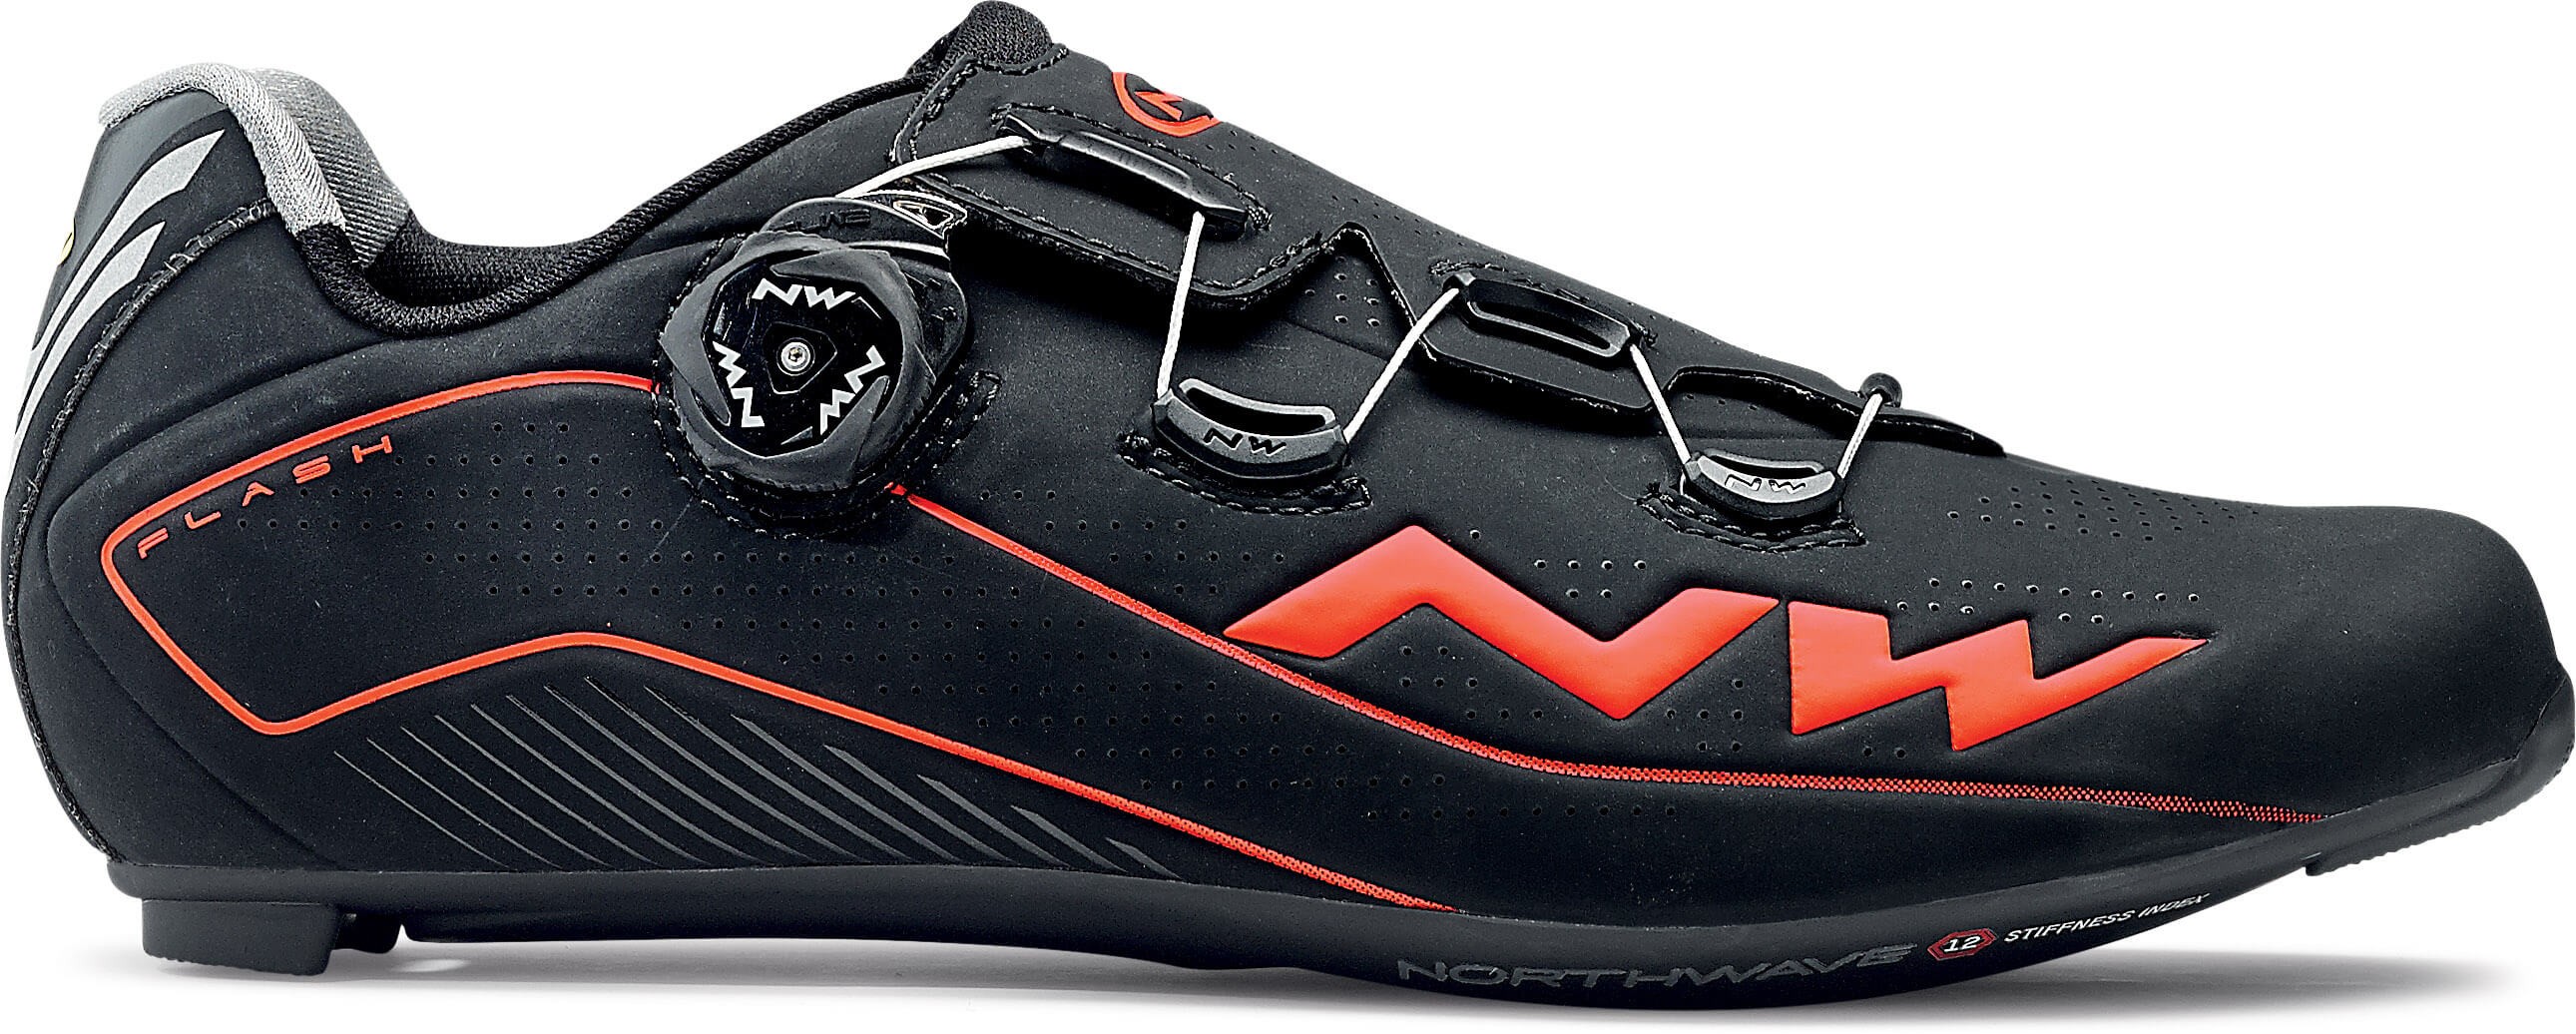 nw cycling shoes